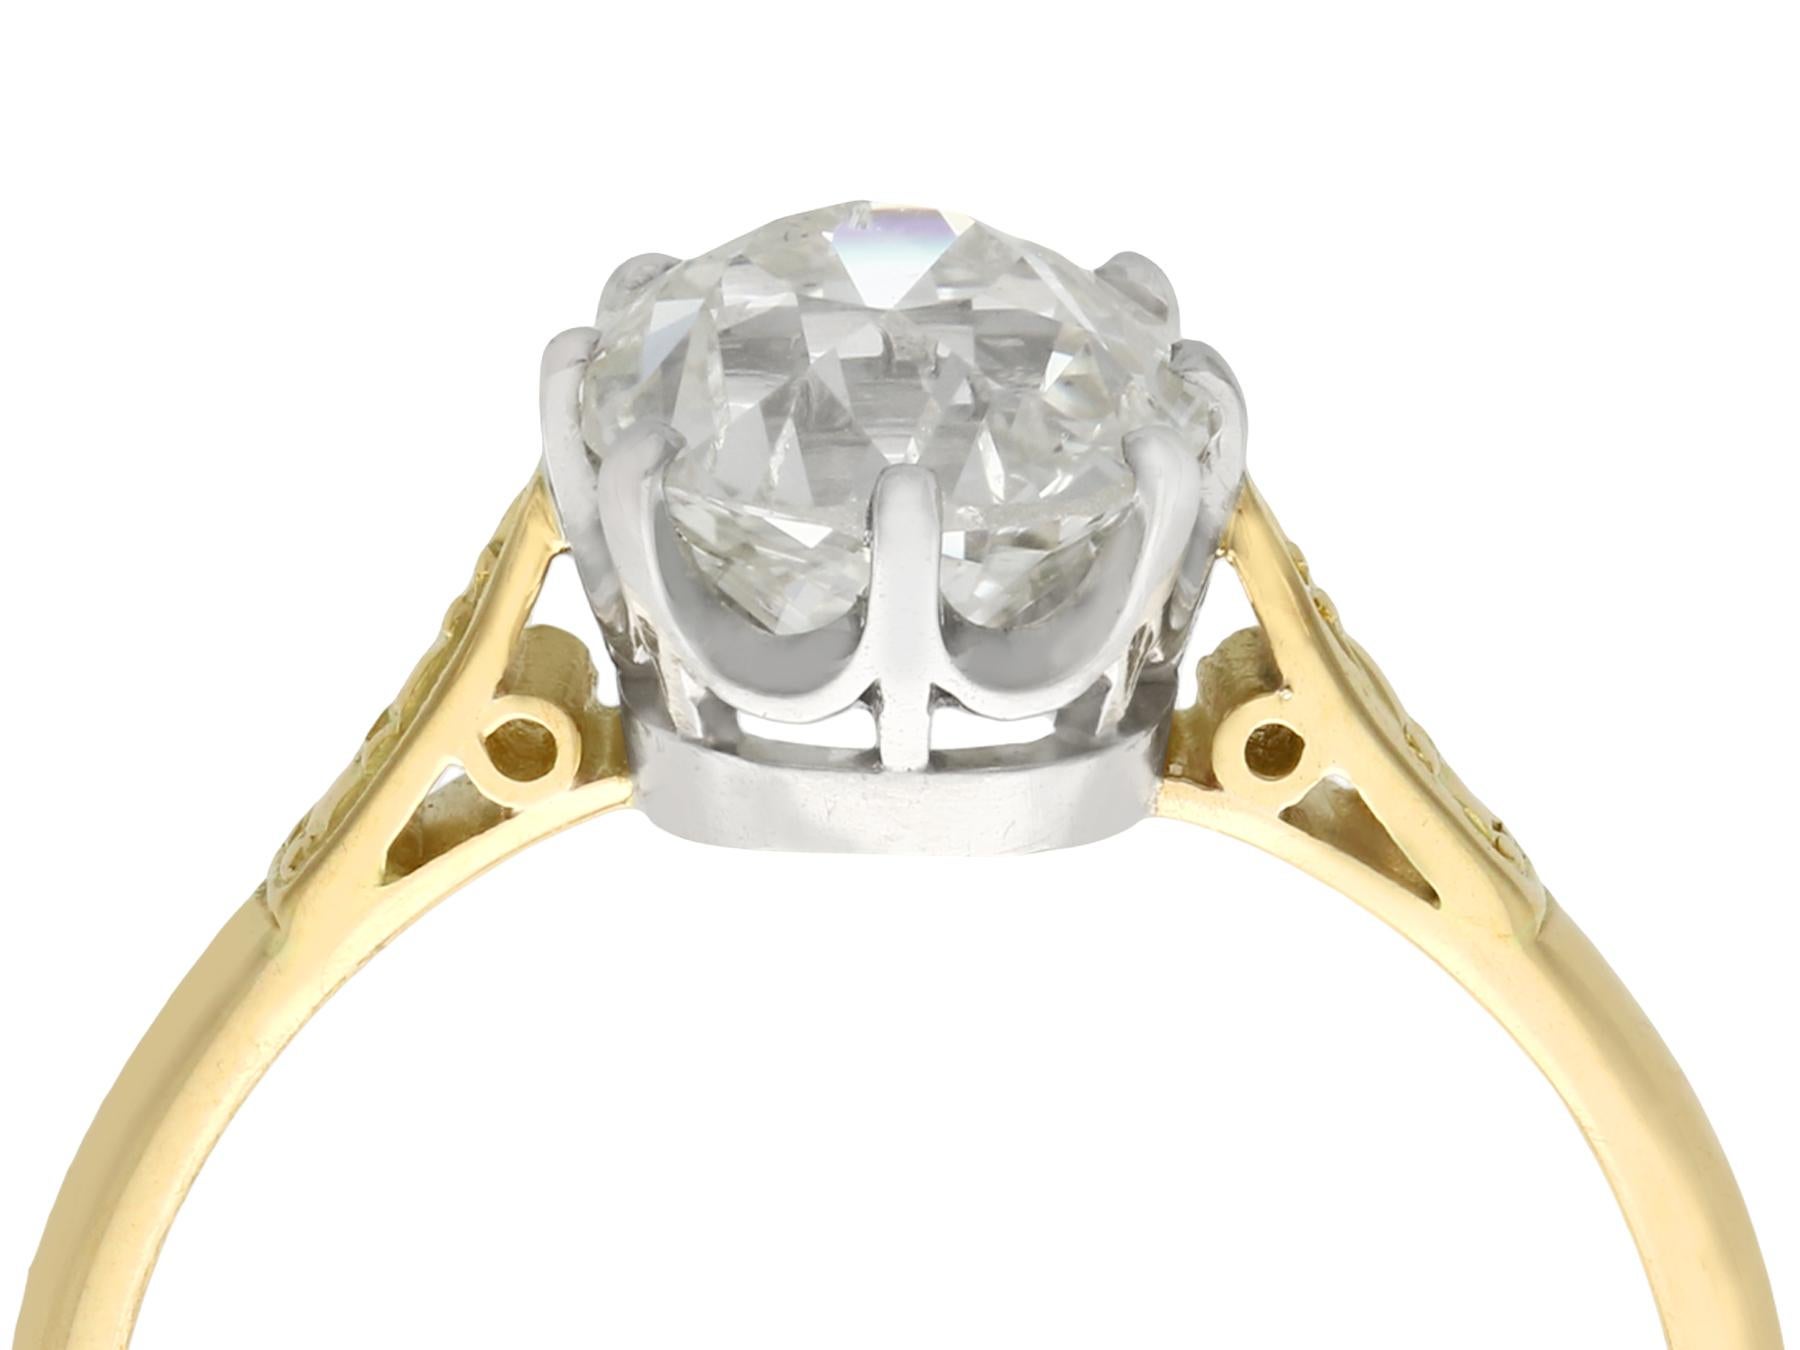 An impressive antique 1.96 carat diamond and 18 karat yellow gold, platinum set solitaire engagement ring; part of our diverse diamond jewelry collections

This fine and impressive antique solitaire engagement ring has been crafted in 18k yellow